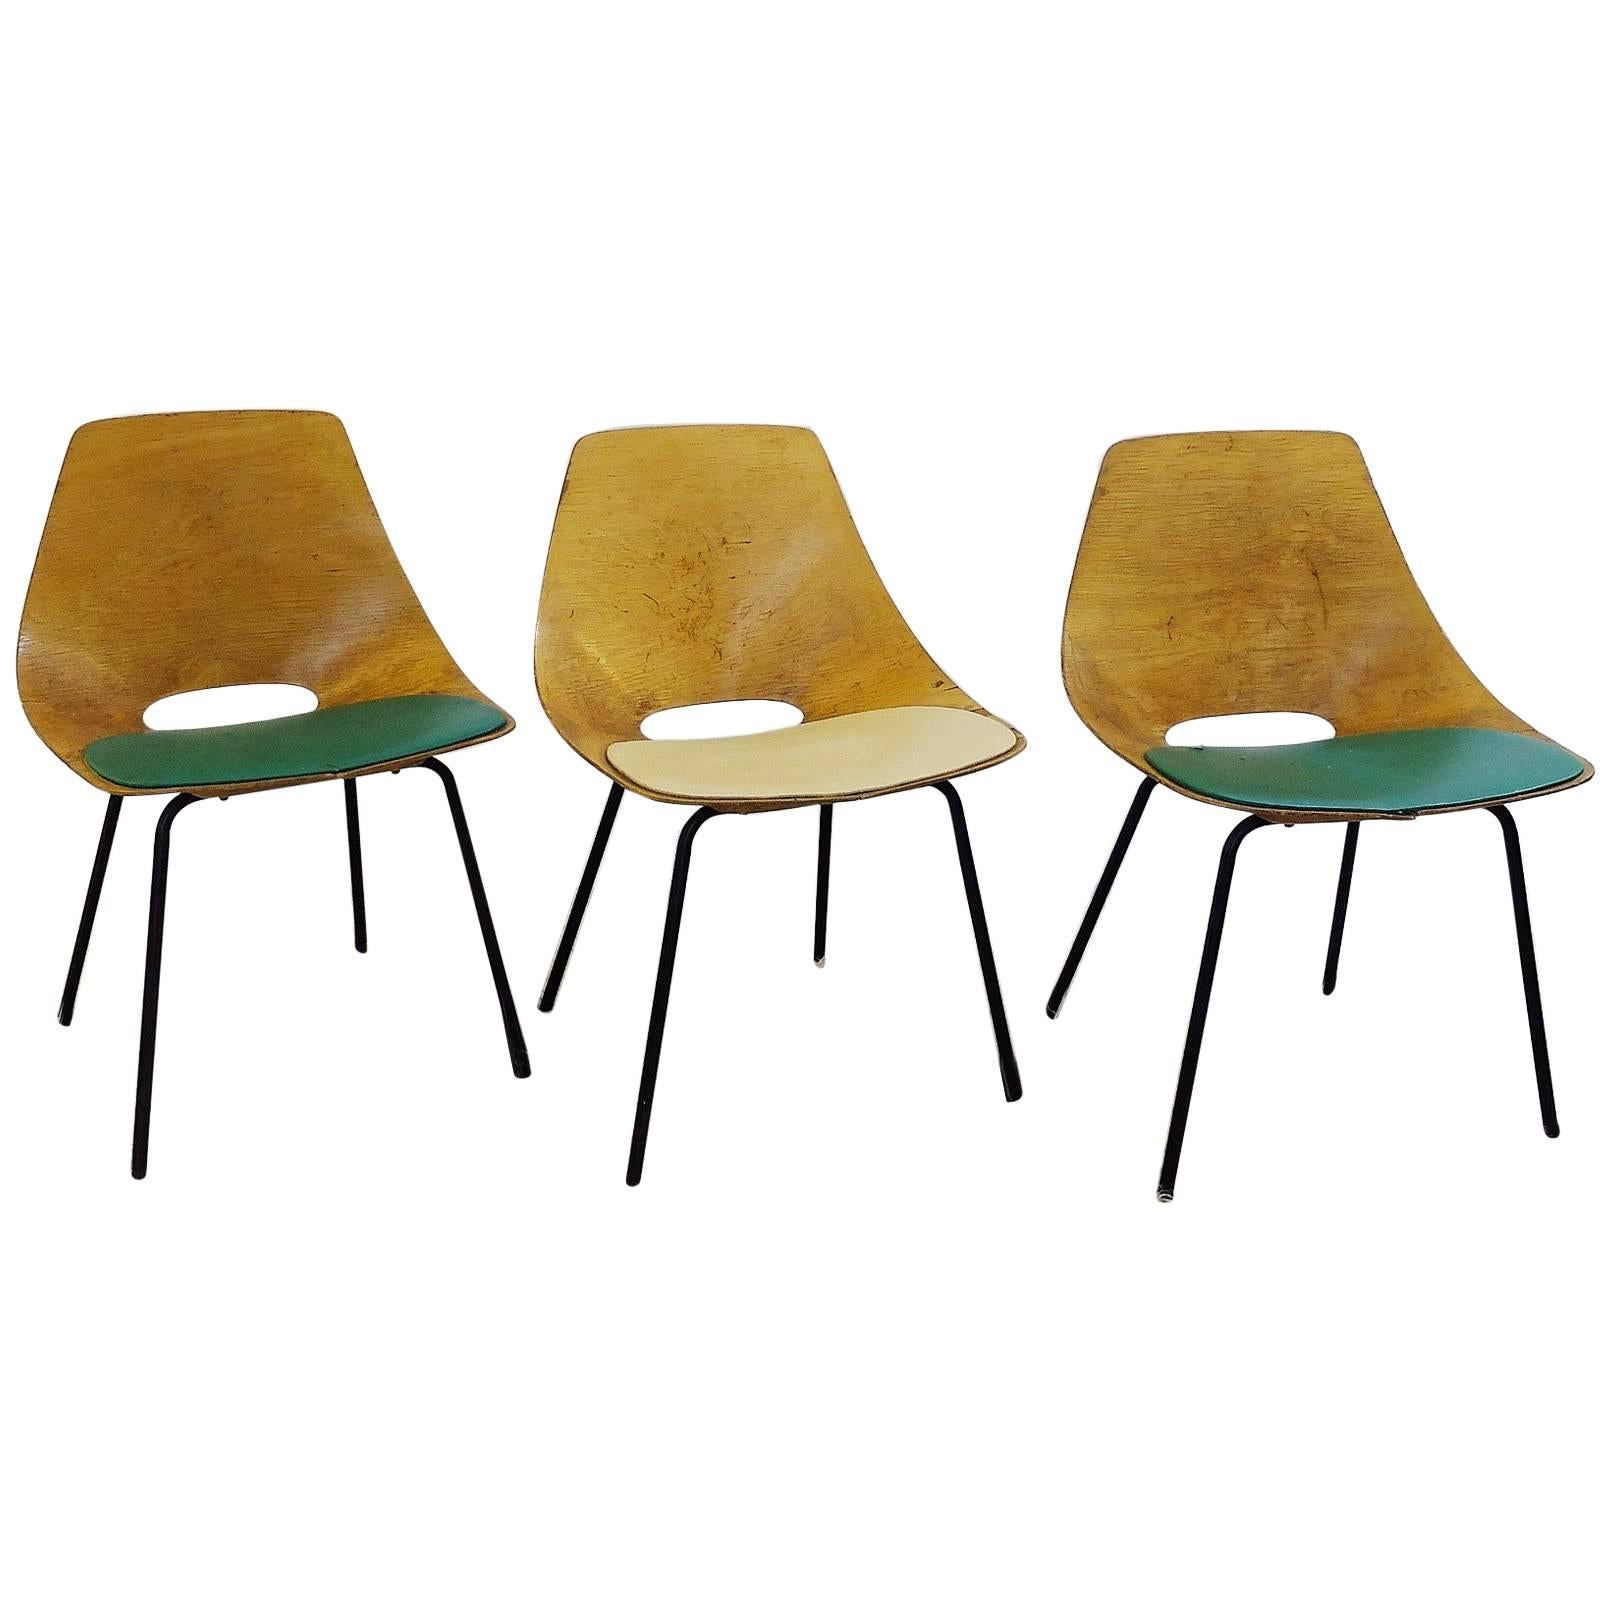 Set of Three Pierre Guariche "Tonneau" Bentwood Chairs for Steiner Edition, 1954